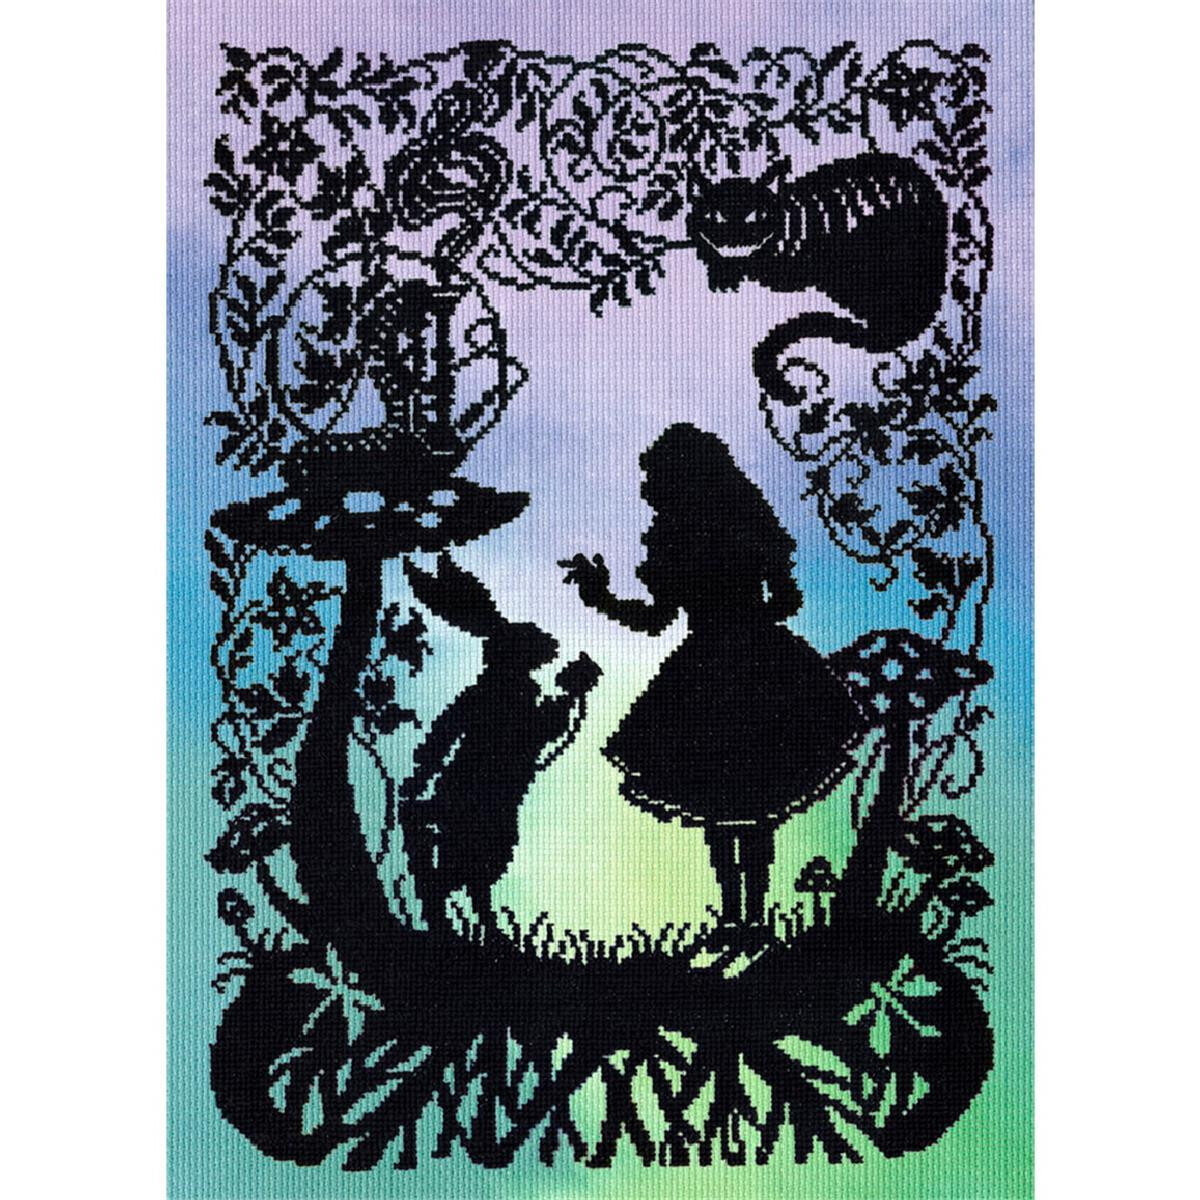 A silhouette of the characters from Alice in Wonderland...